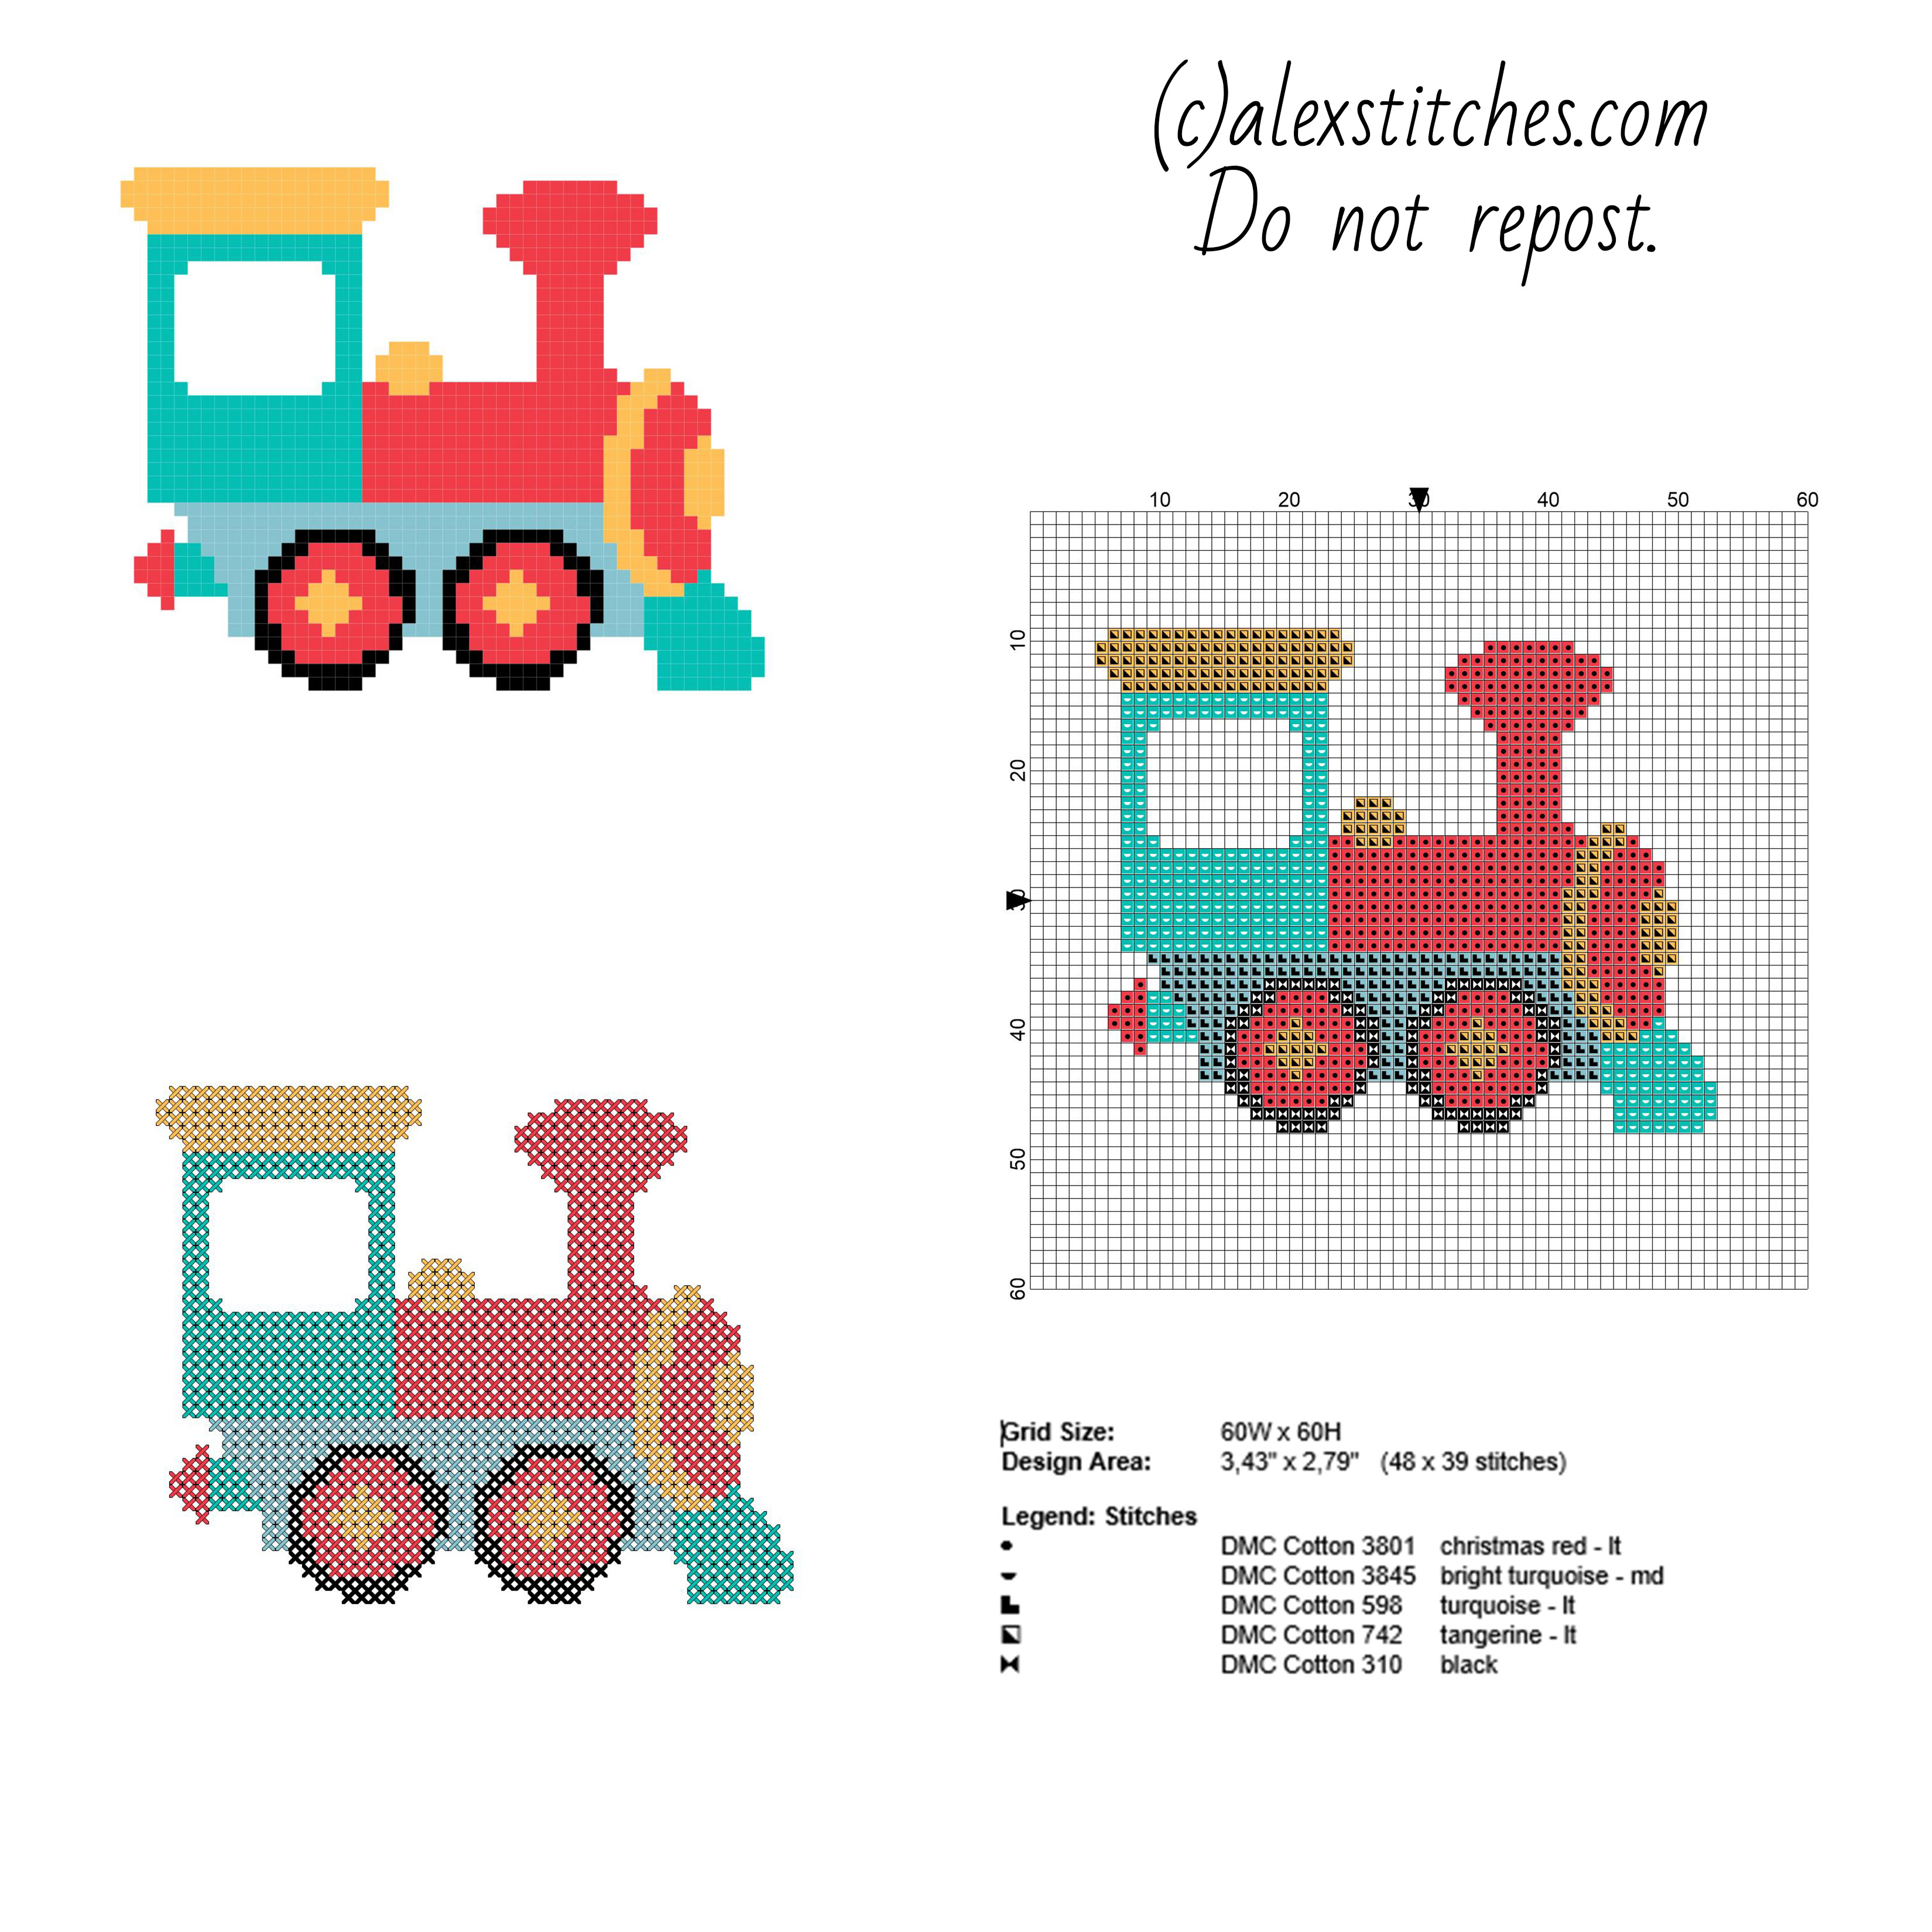 Colored toy train small and free cross stitch pattern 48 x 39 stitches 5 DMC threads